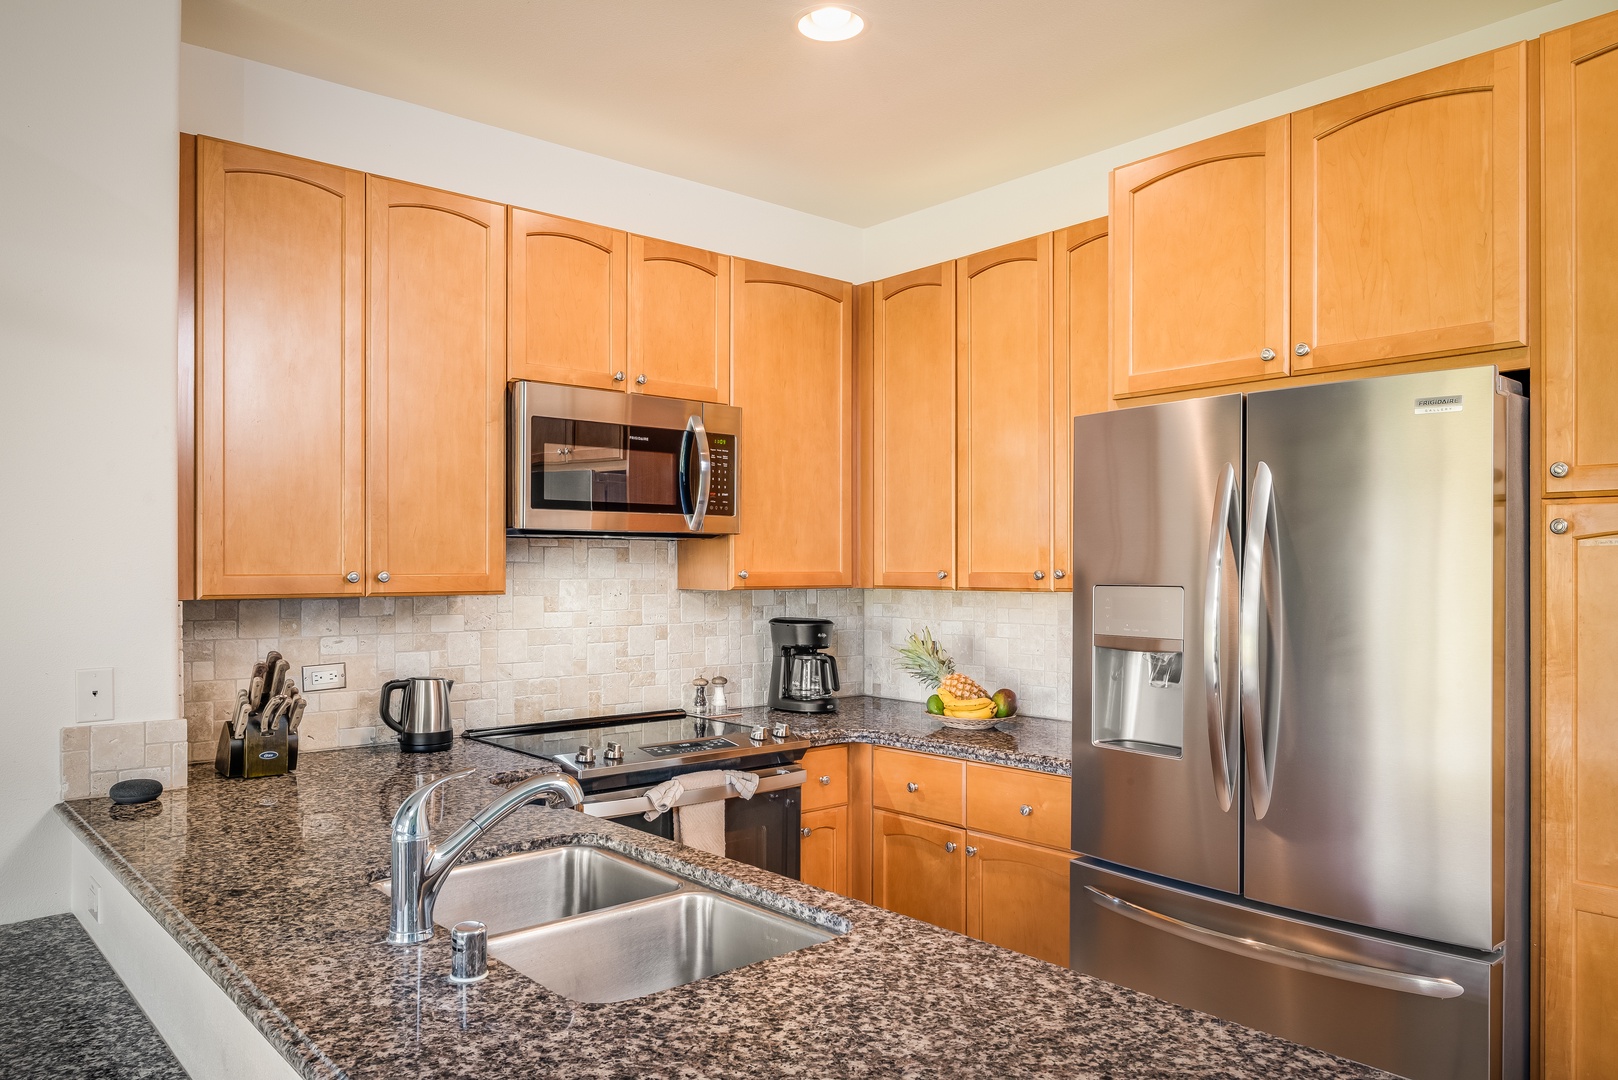 Waikoloa Vacation Rentals, Waikoloa Colony Villas 403 - Full Kitchen w/ Granite Countertops and Updated Stainless Steel Appliances